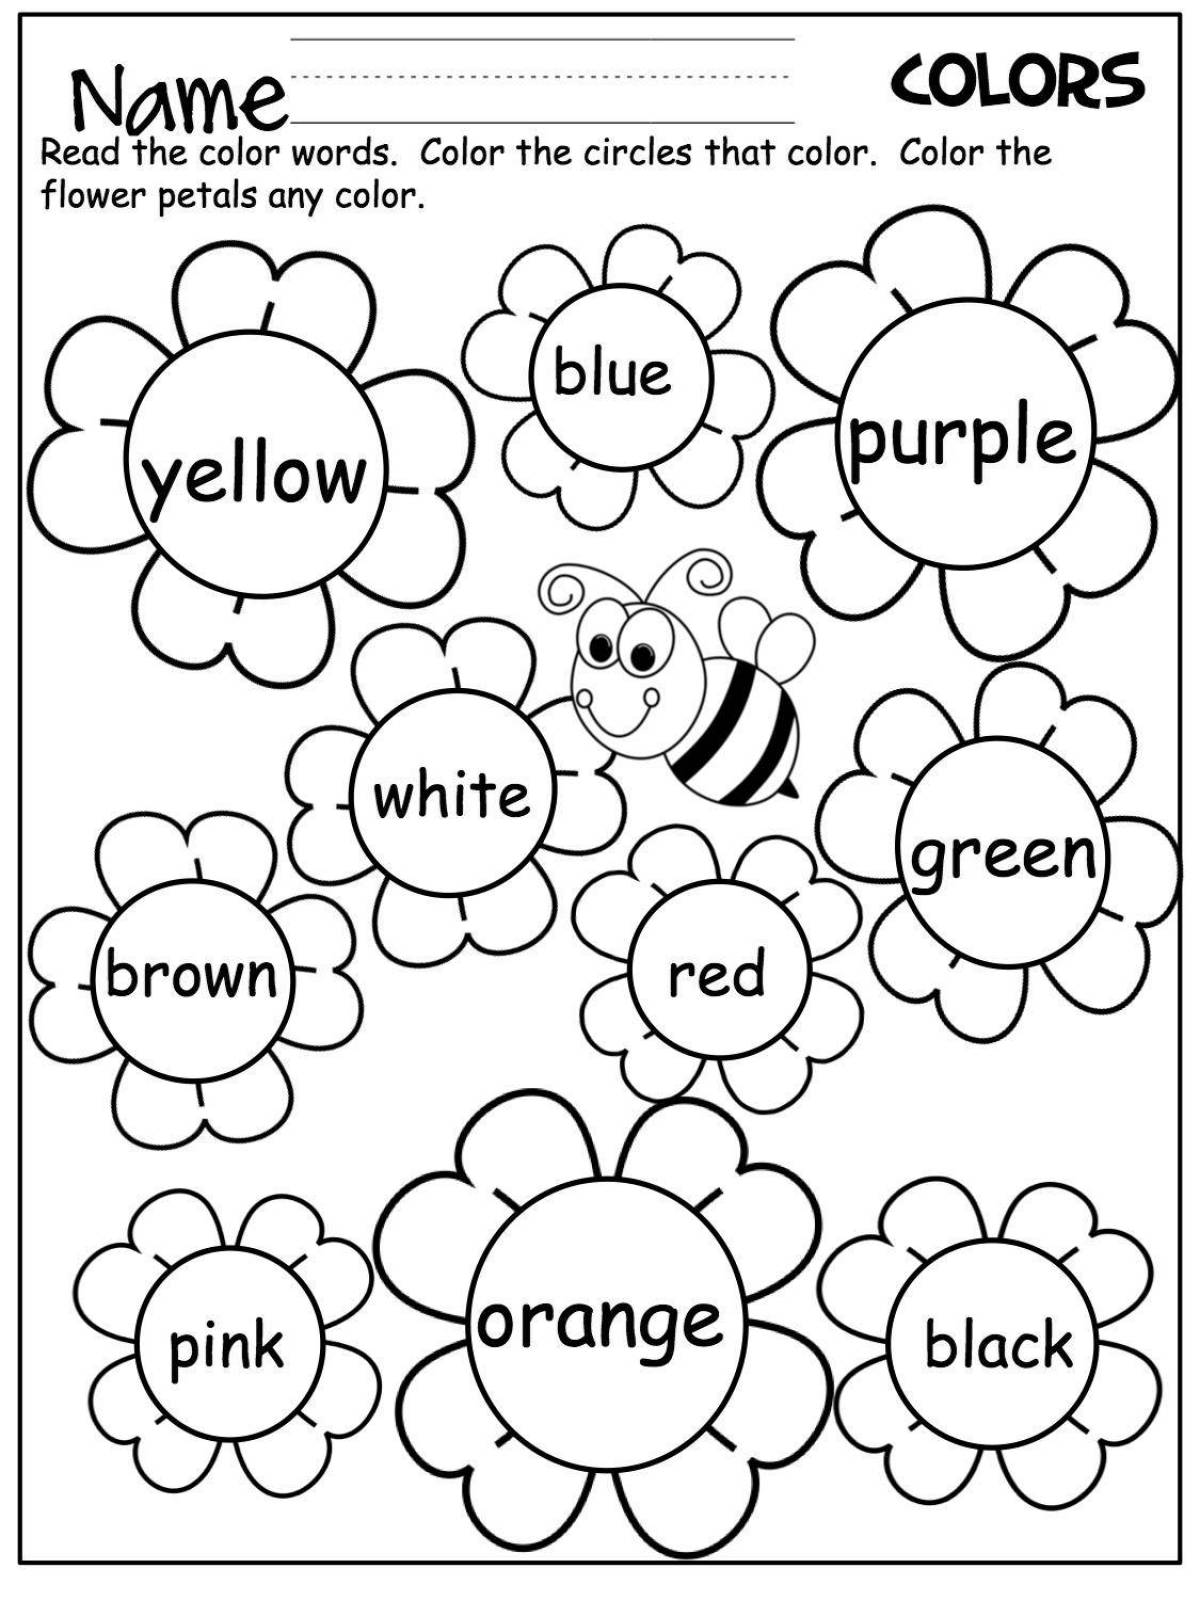 A wonderful coloring book in English for children